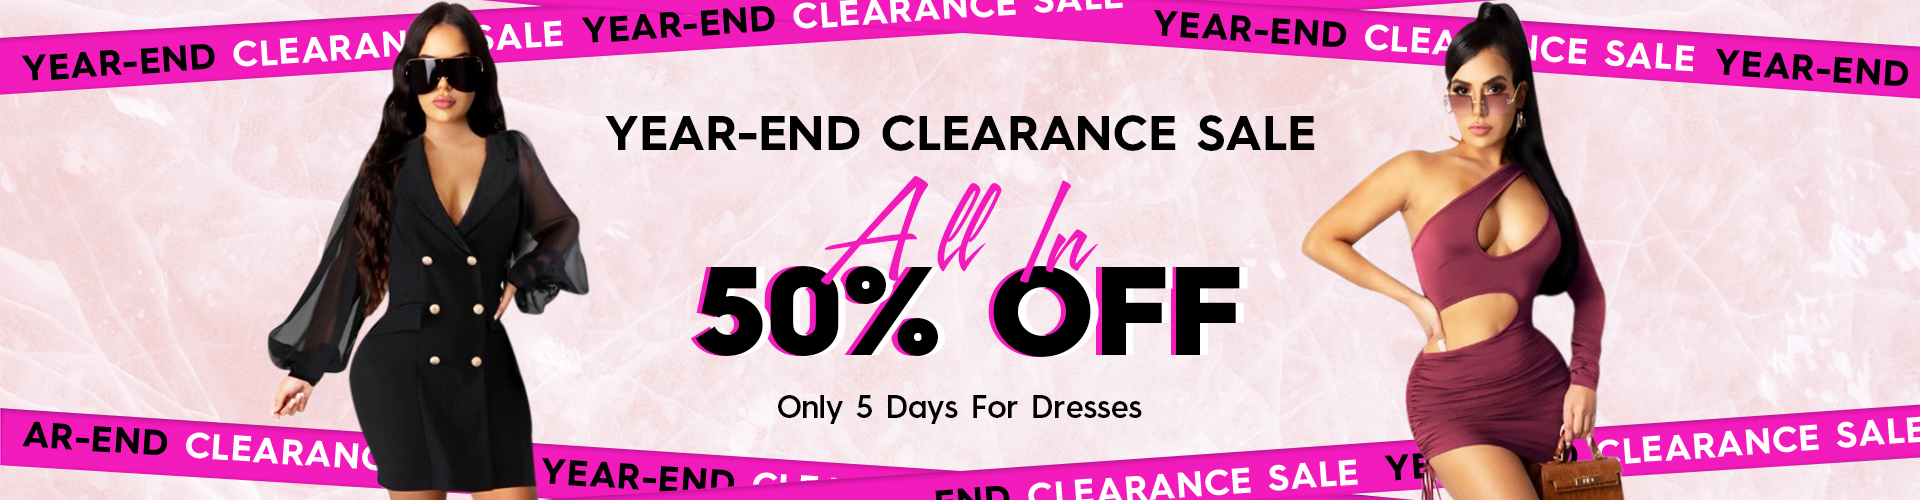 Clearance For Dresses